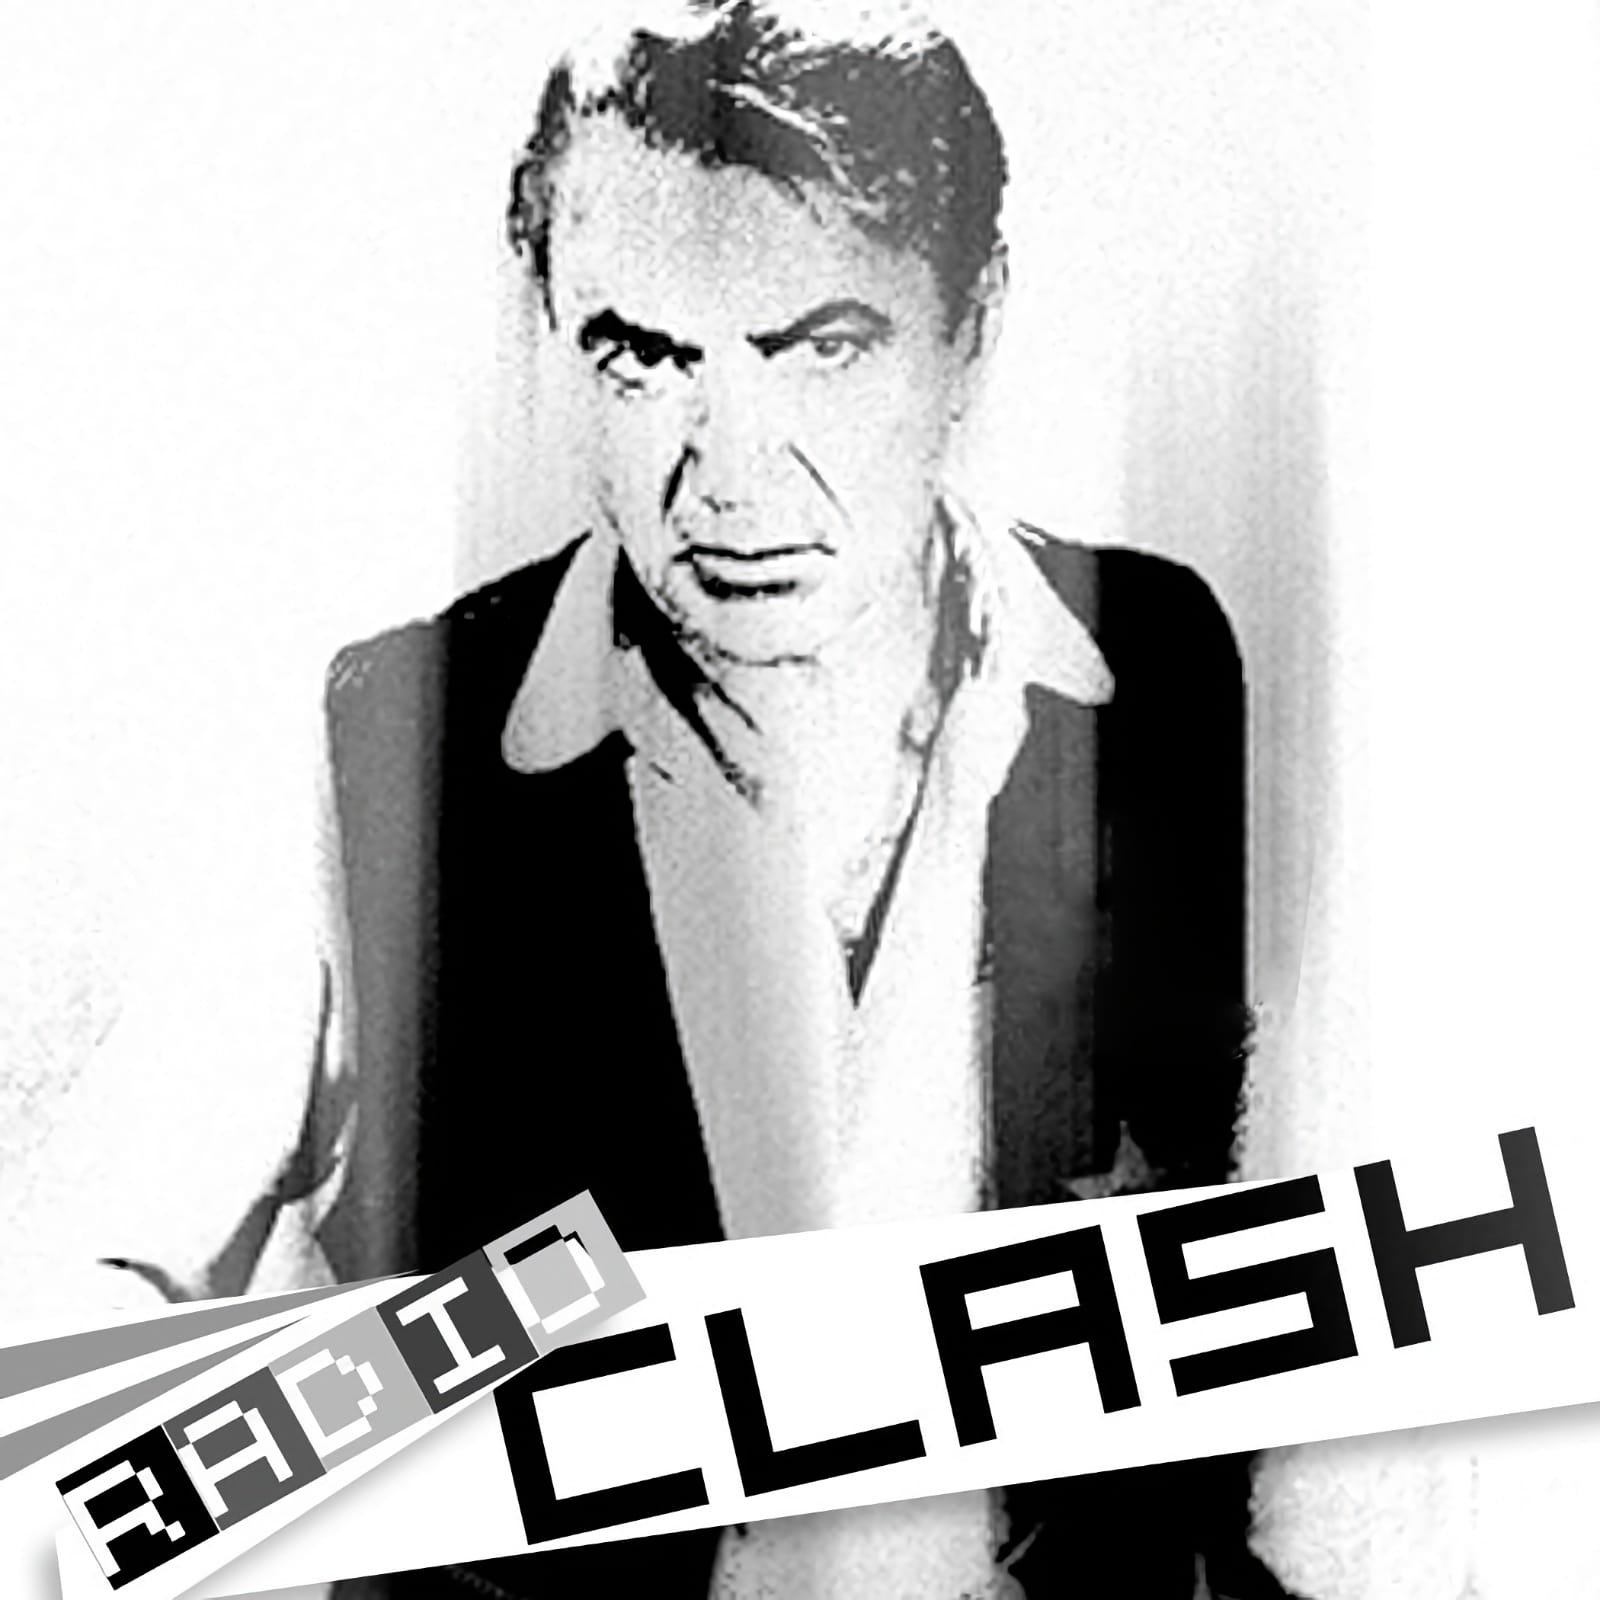 Radio Clash premiere! music mashup podcast first 2004 cover shows logo and Gary Cooper in High Noon